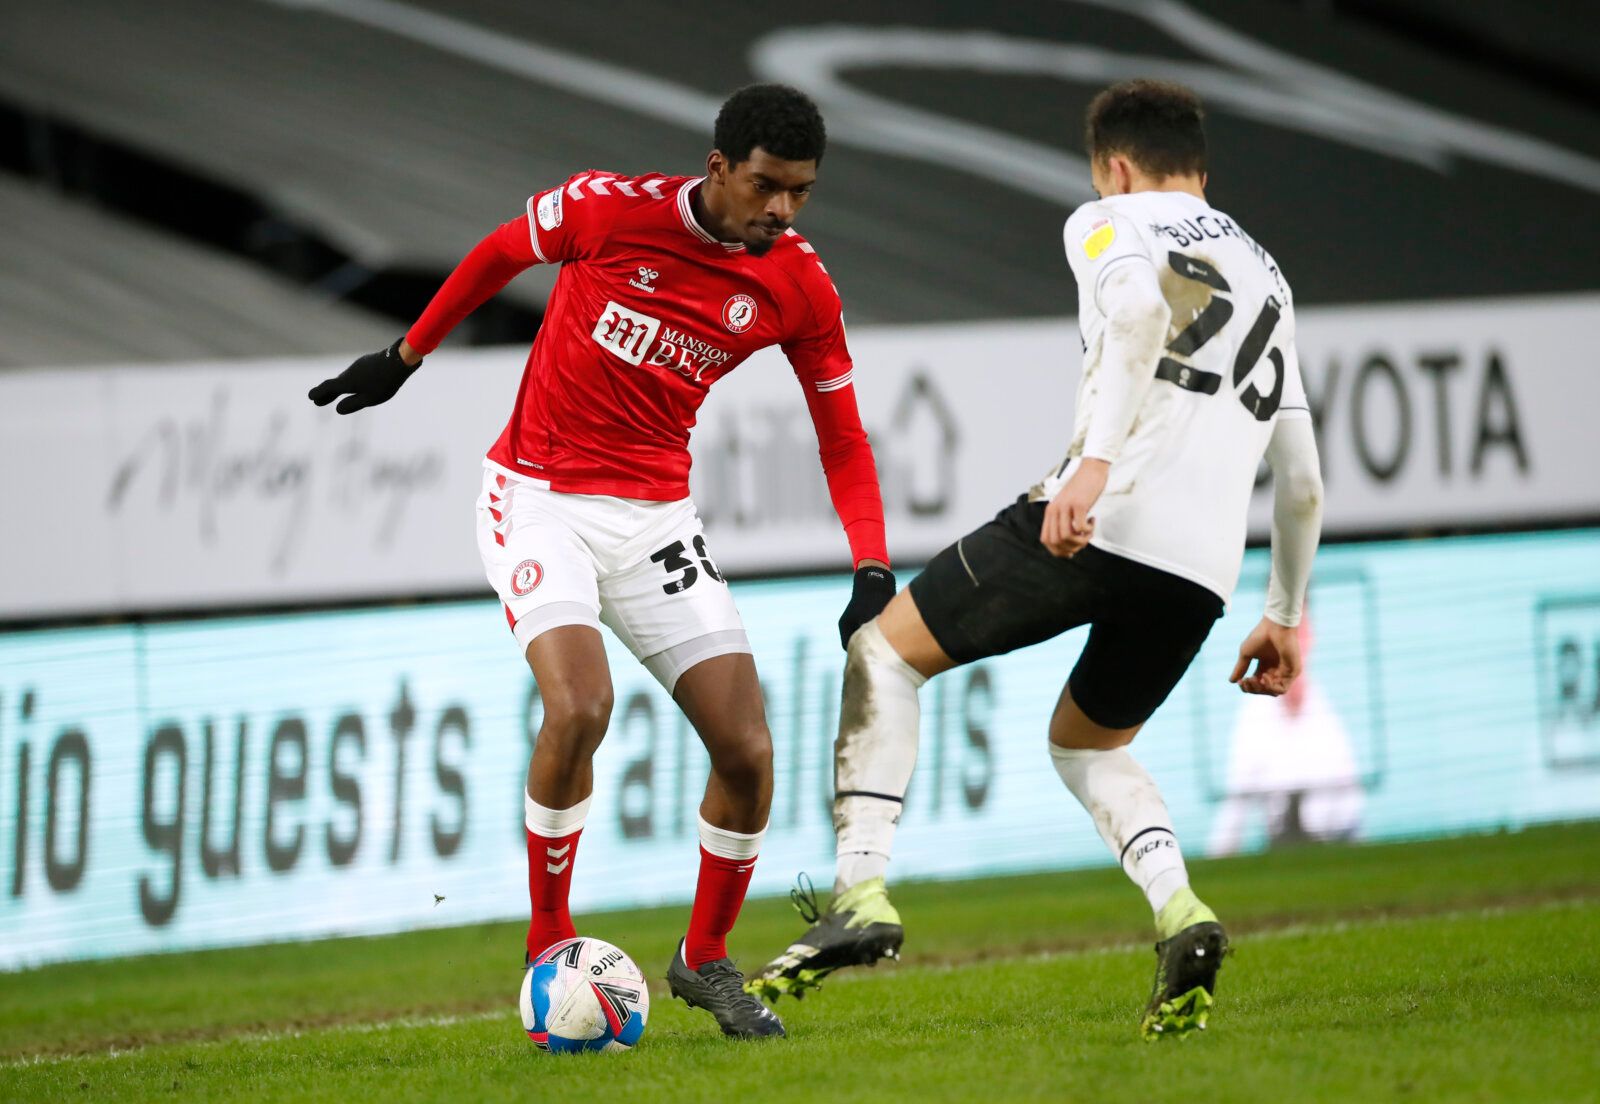 Soccer Football - Championship - Derby County v Bristol City - Pride Park, Derby, Britain - January 30, 2021 Bristol City's Tyreeq Bakinson in action with Derby County's Lee Buchanan Action Images/Andrew Boyers EDITORIAL USE ONLY. No use with unauthorized audio, video, data, fixture lists, club/league logos or 'live' services. Online in-match use limited to 75 images, no video emulation. No use in betting, games or single club /league/player publications.  Please contact your account representat